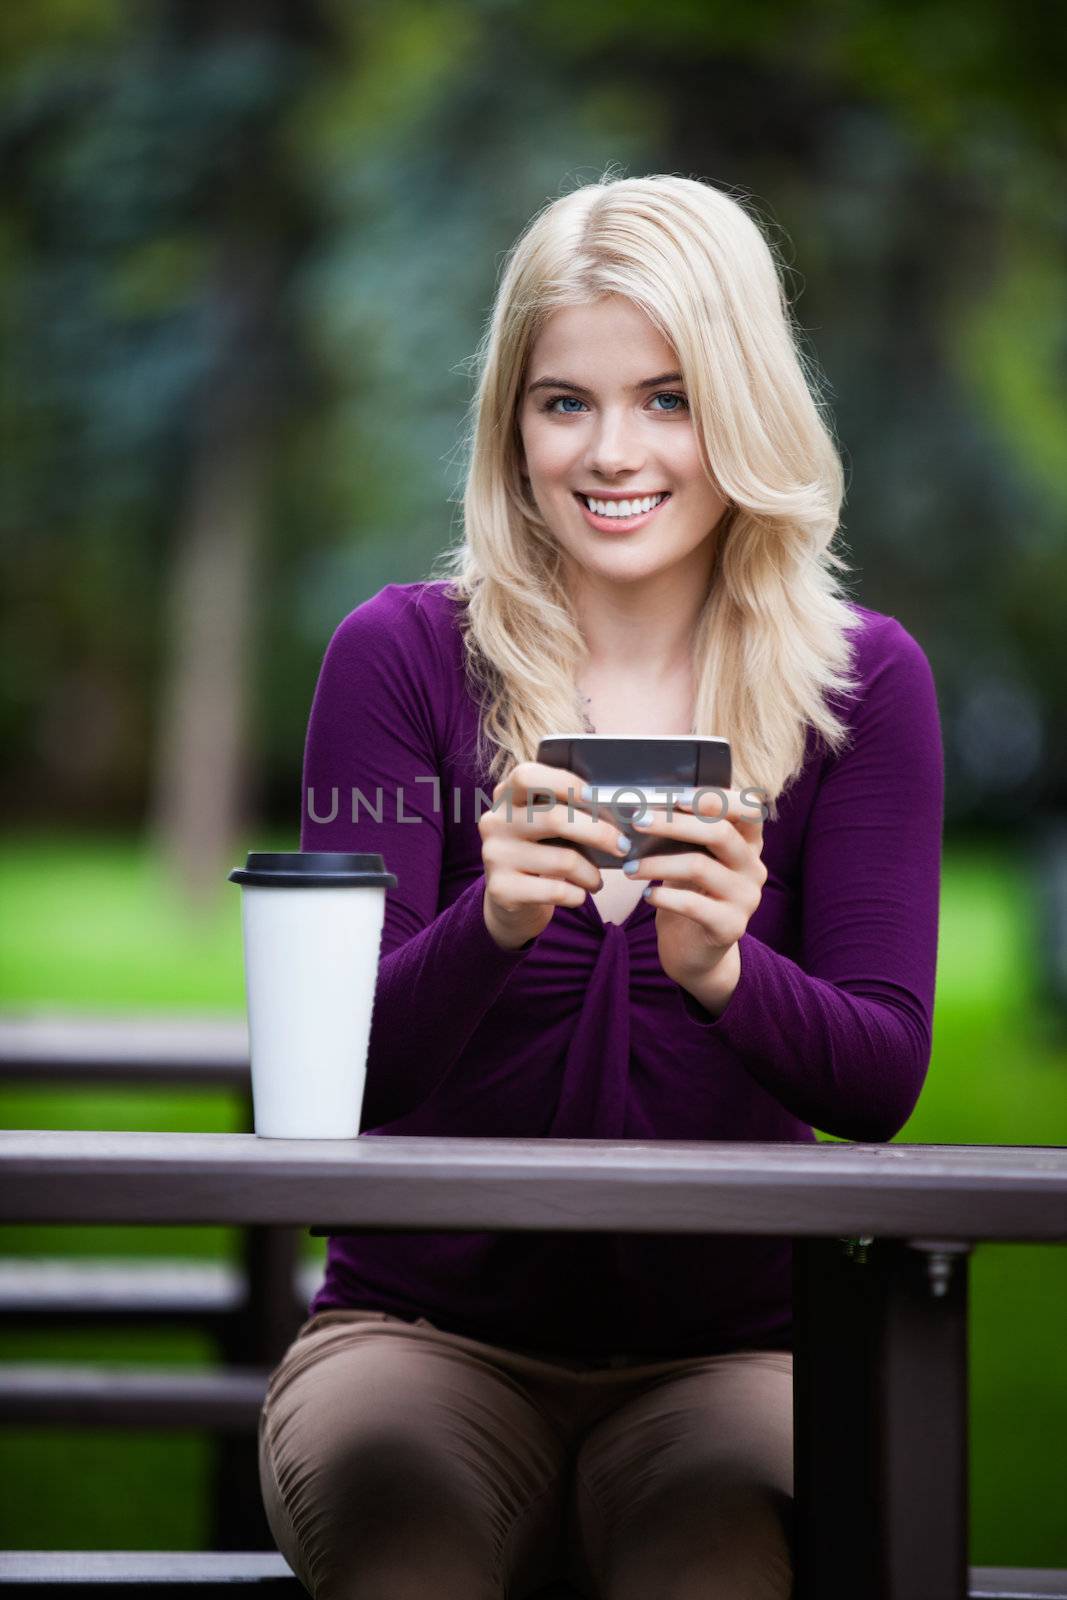 Young college student in park with phone and coffee